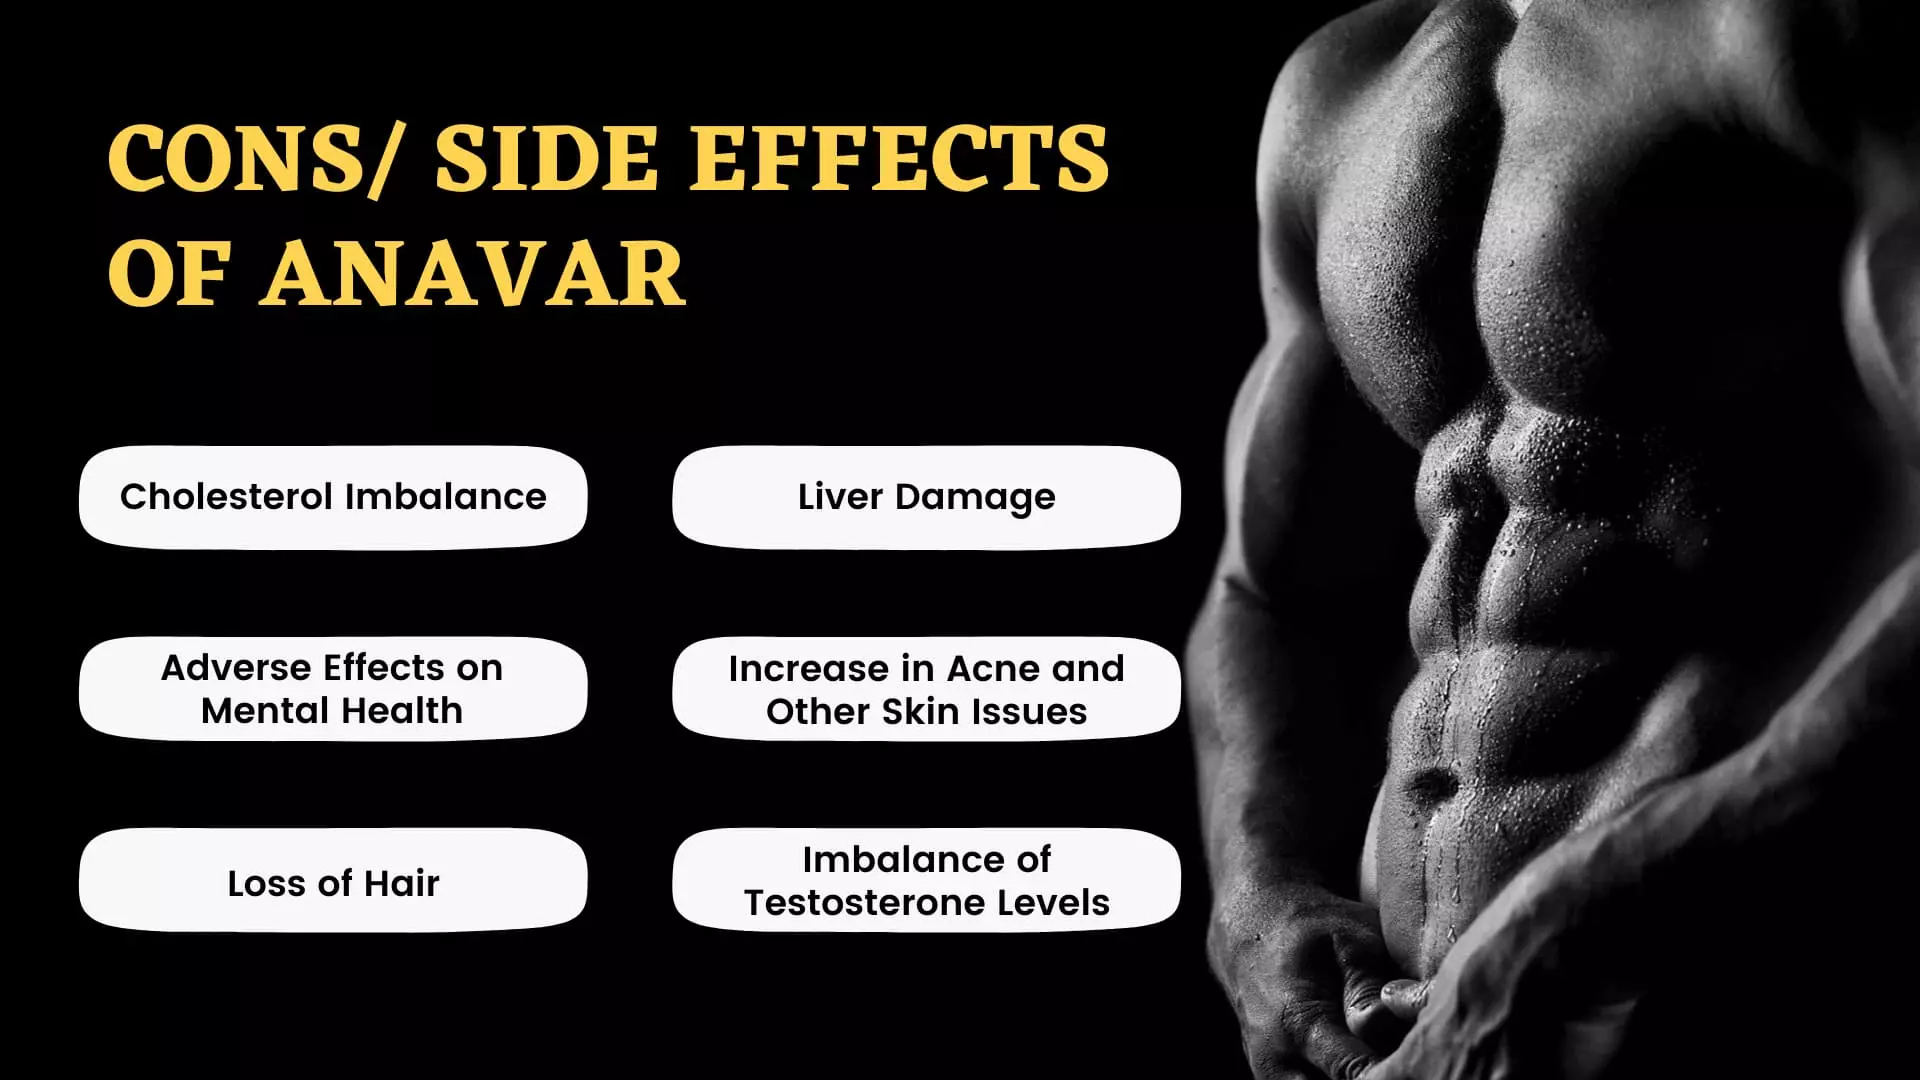 Cons Side Effects of Anavar